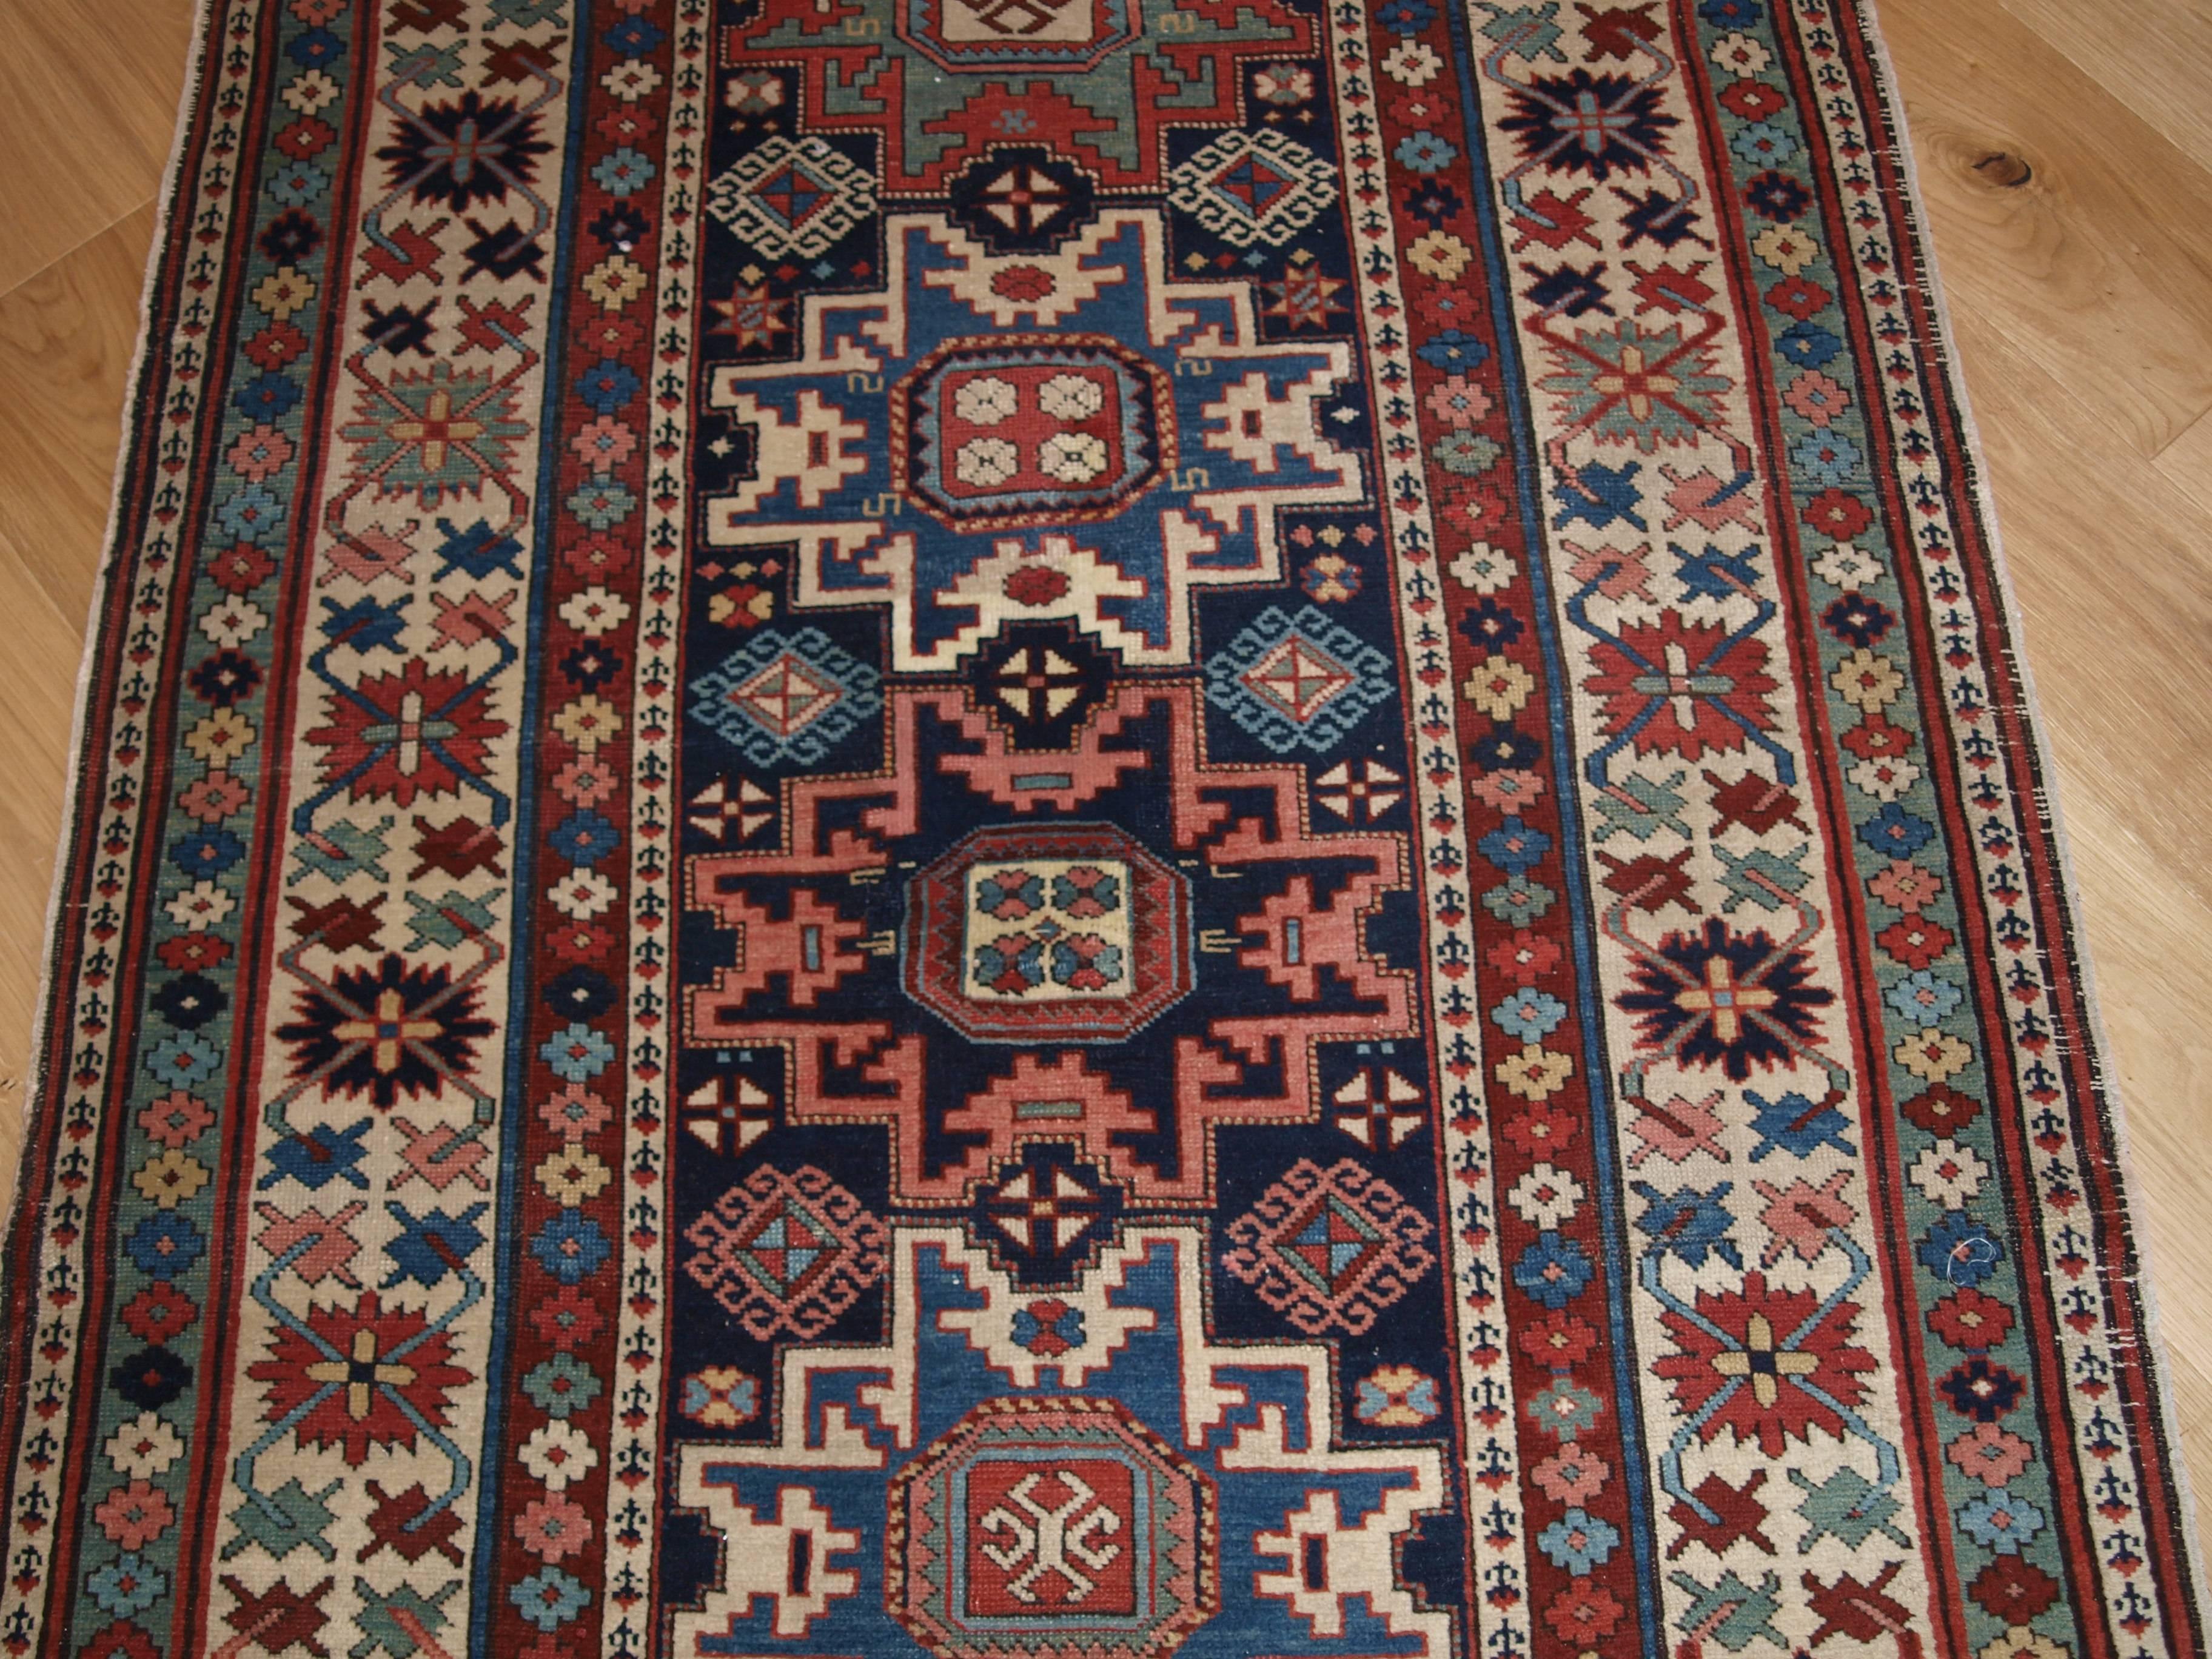 Antique Caucasian Shirvan runner with lesghi star design, fine weave, superb colors, circa 1880.
Size: 9ft 11in x 3ft 6in (302 x 108cm).

A very good example of a Shirvan runner, fine weave and outstanding colors. The field is a repeat medallion